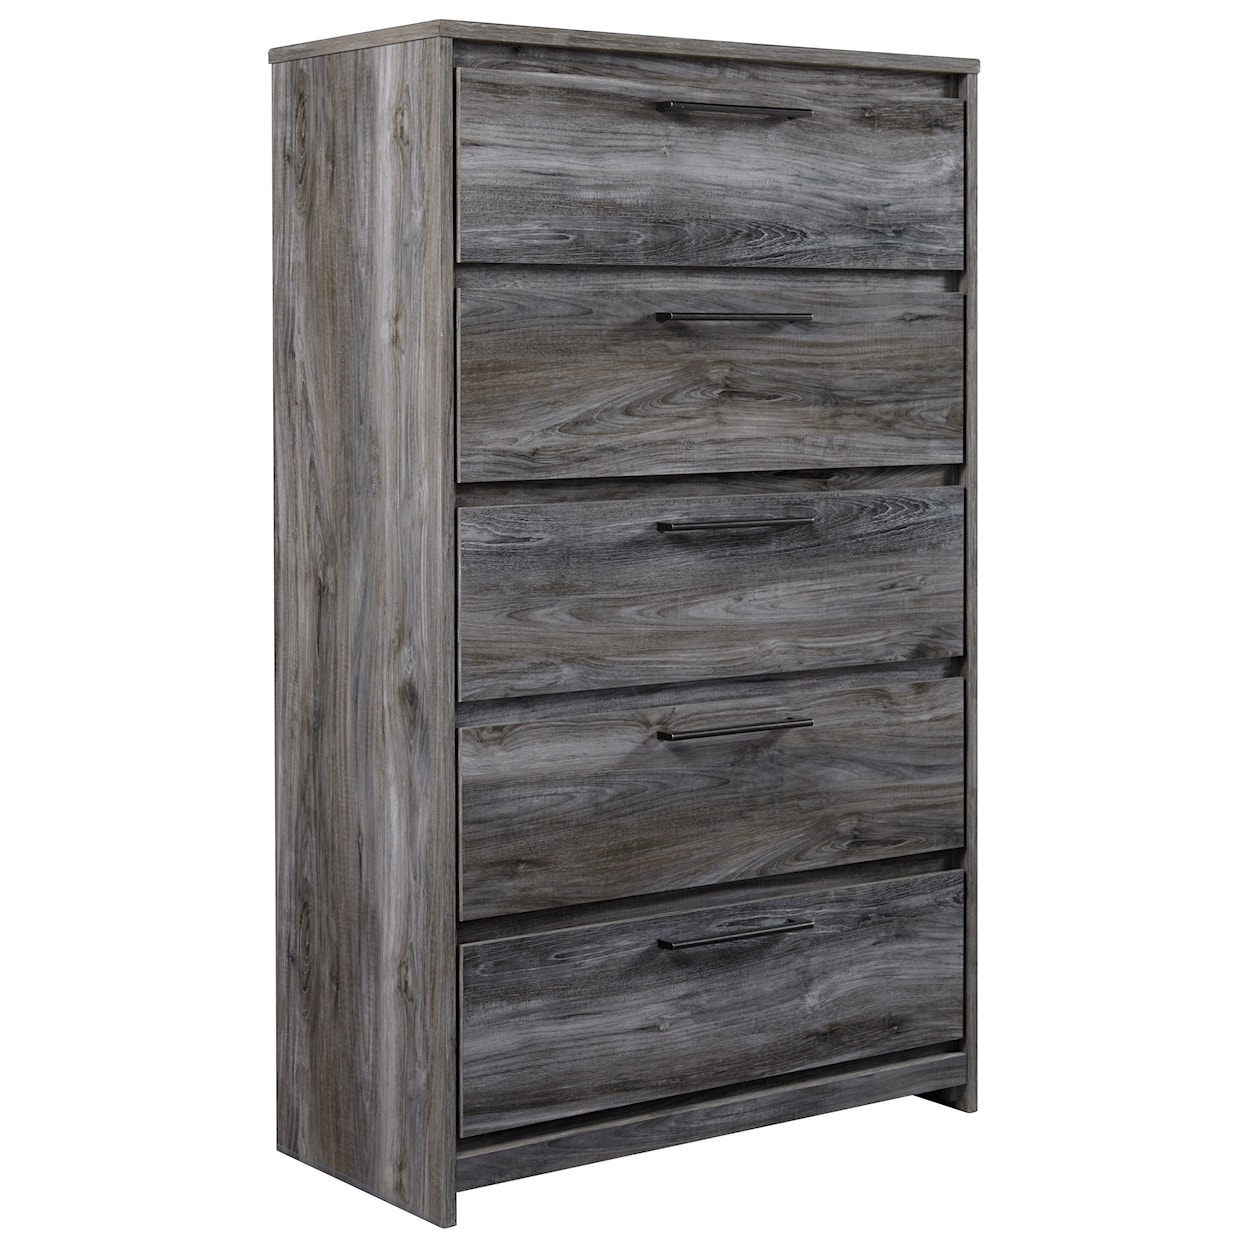 Michael Alan Select Baystorm Chest of Drawers